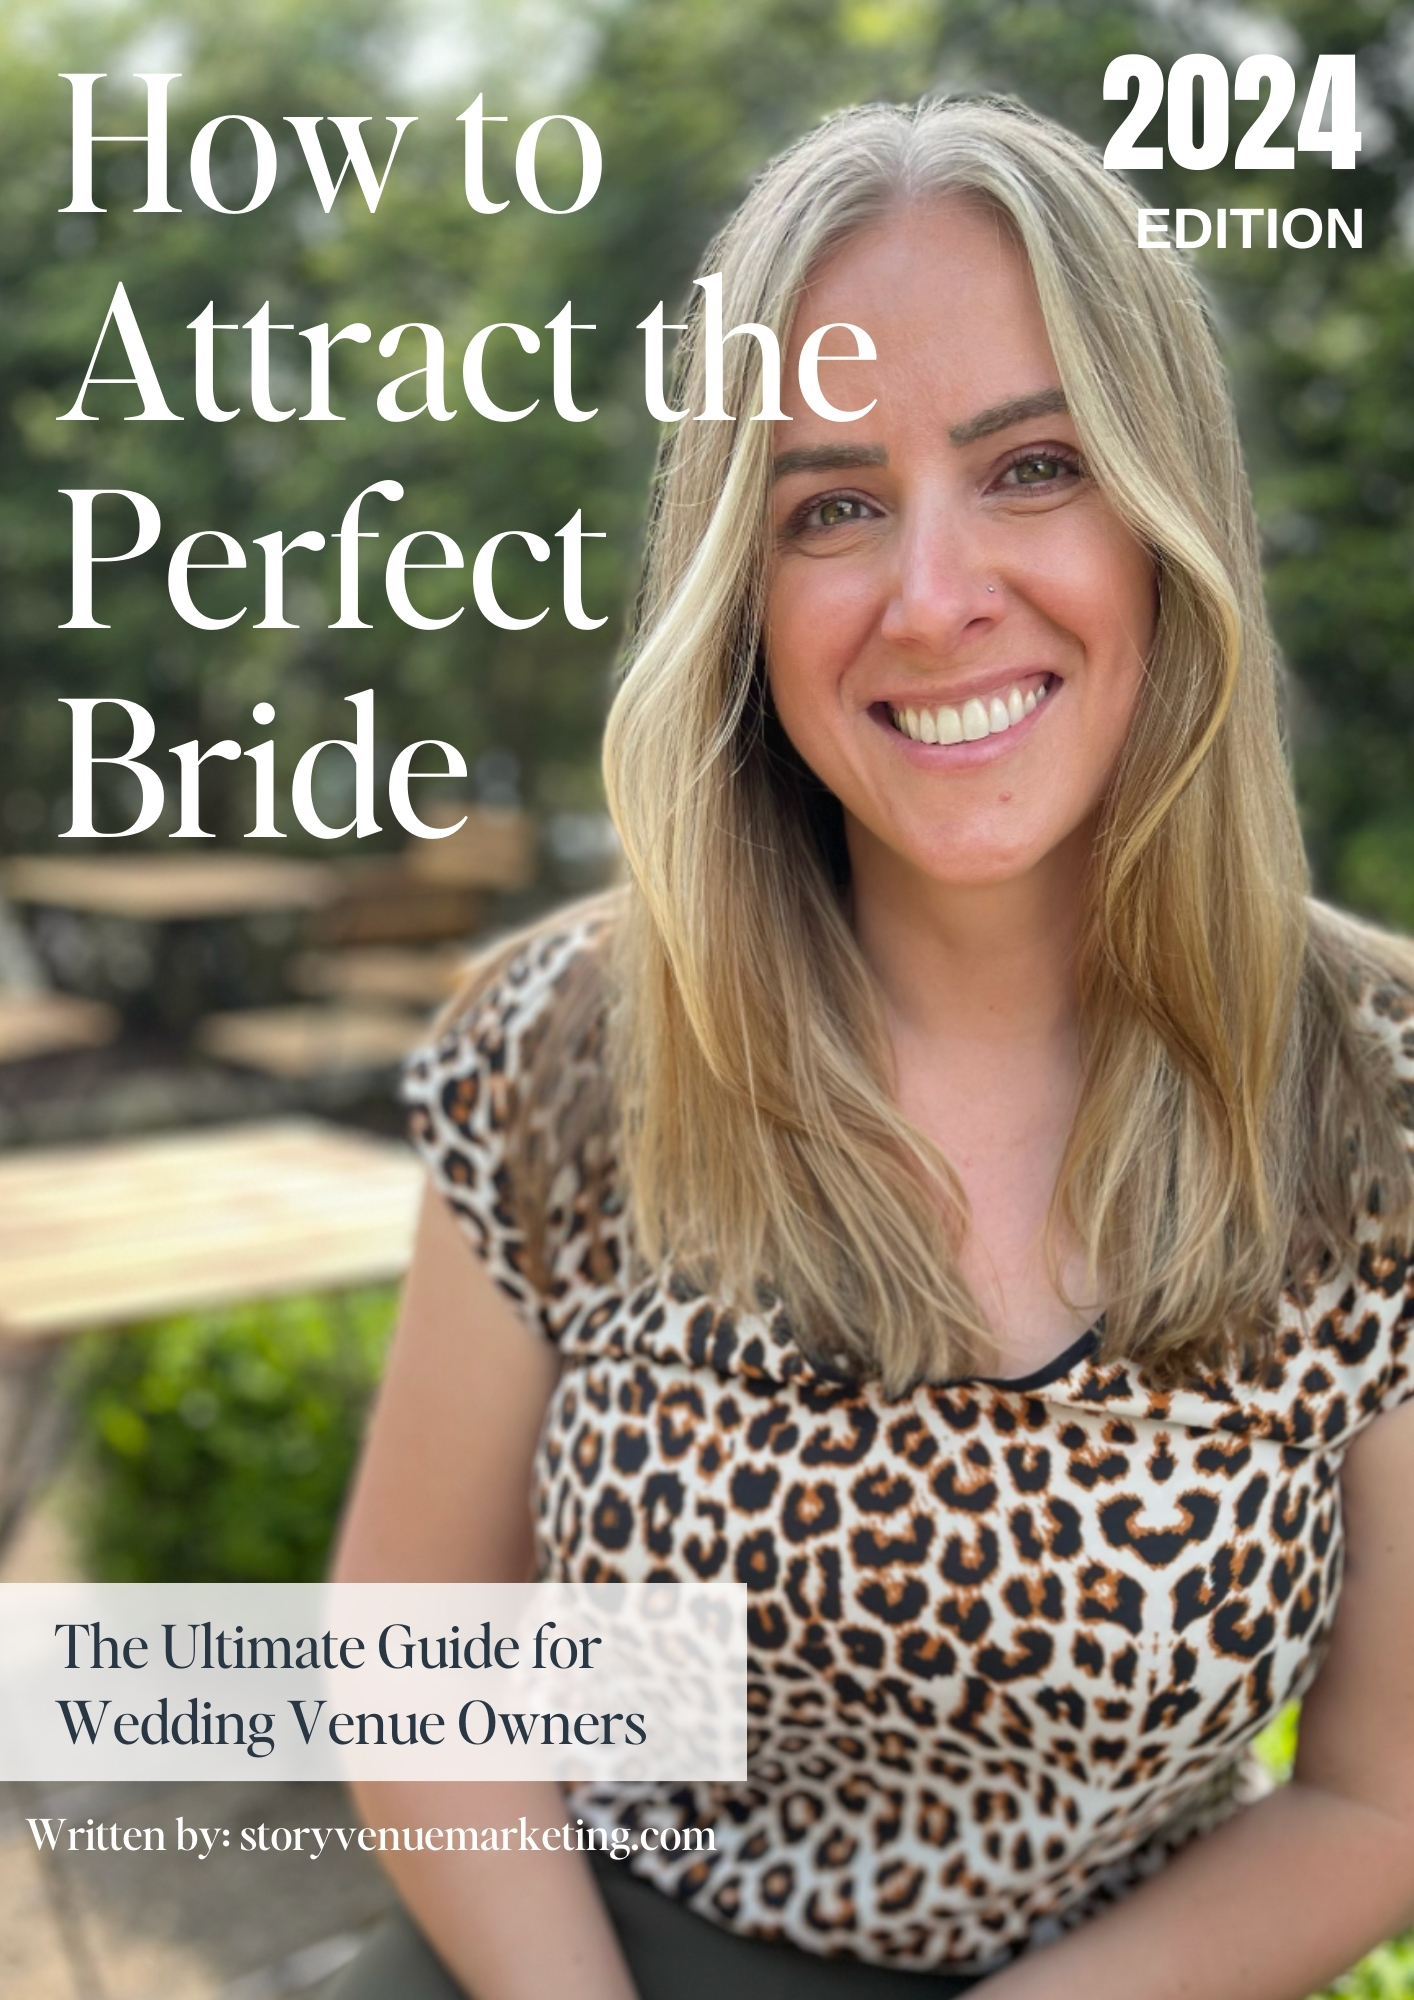 How to attract the perfect bride